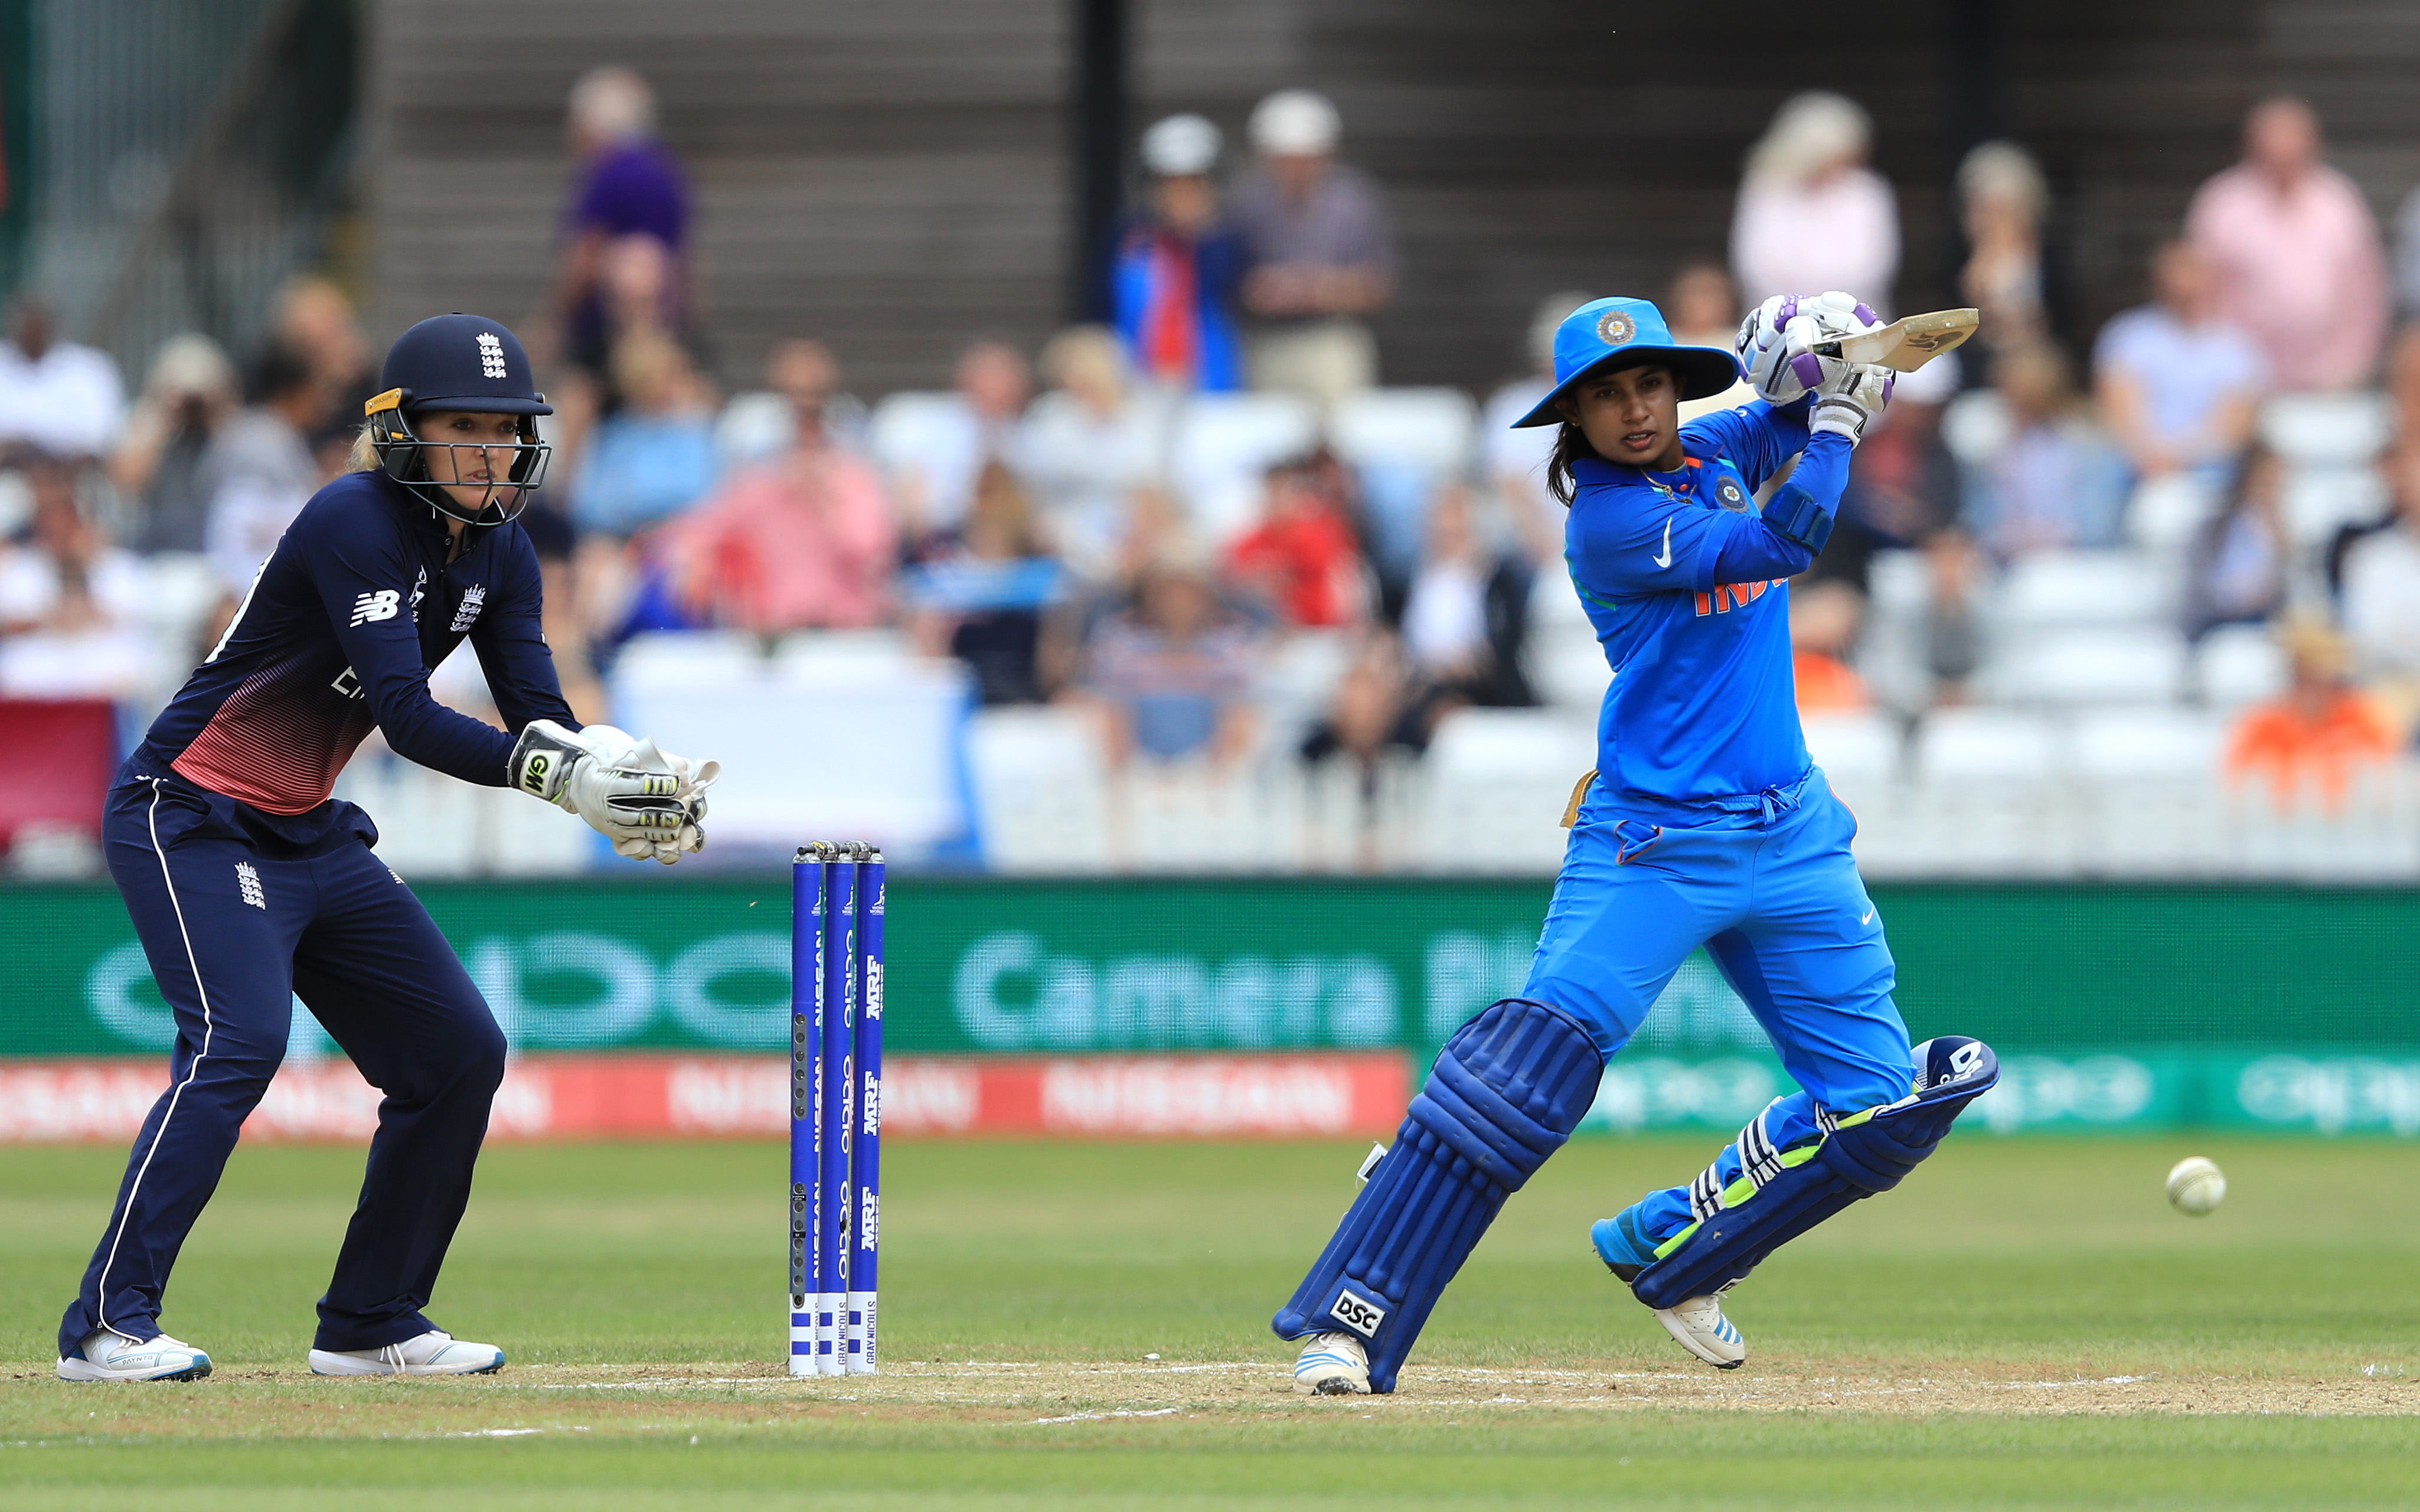 Women’s T20 Challenge | At one point, I thought match would be one-sided, says Mithali Raj